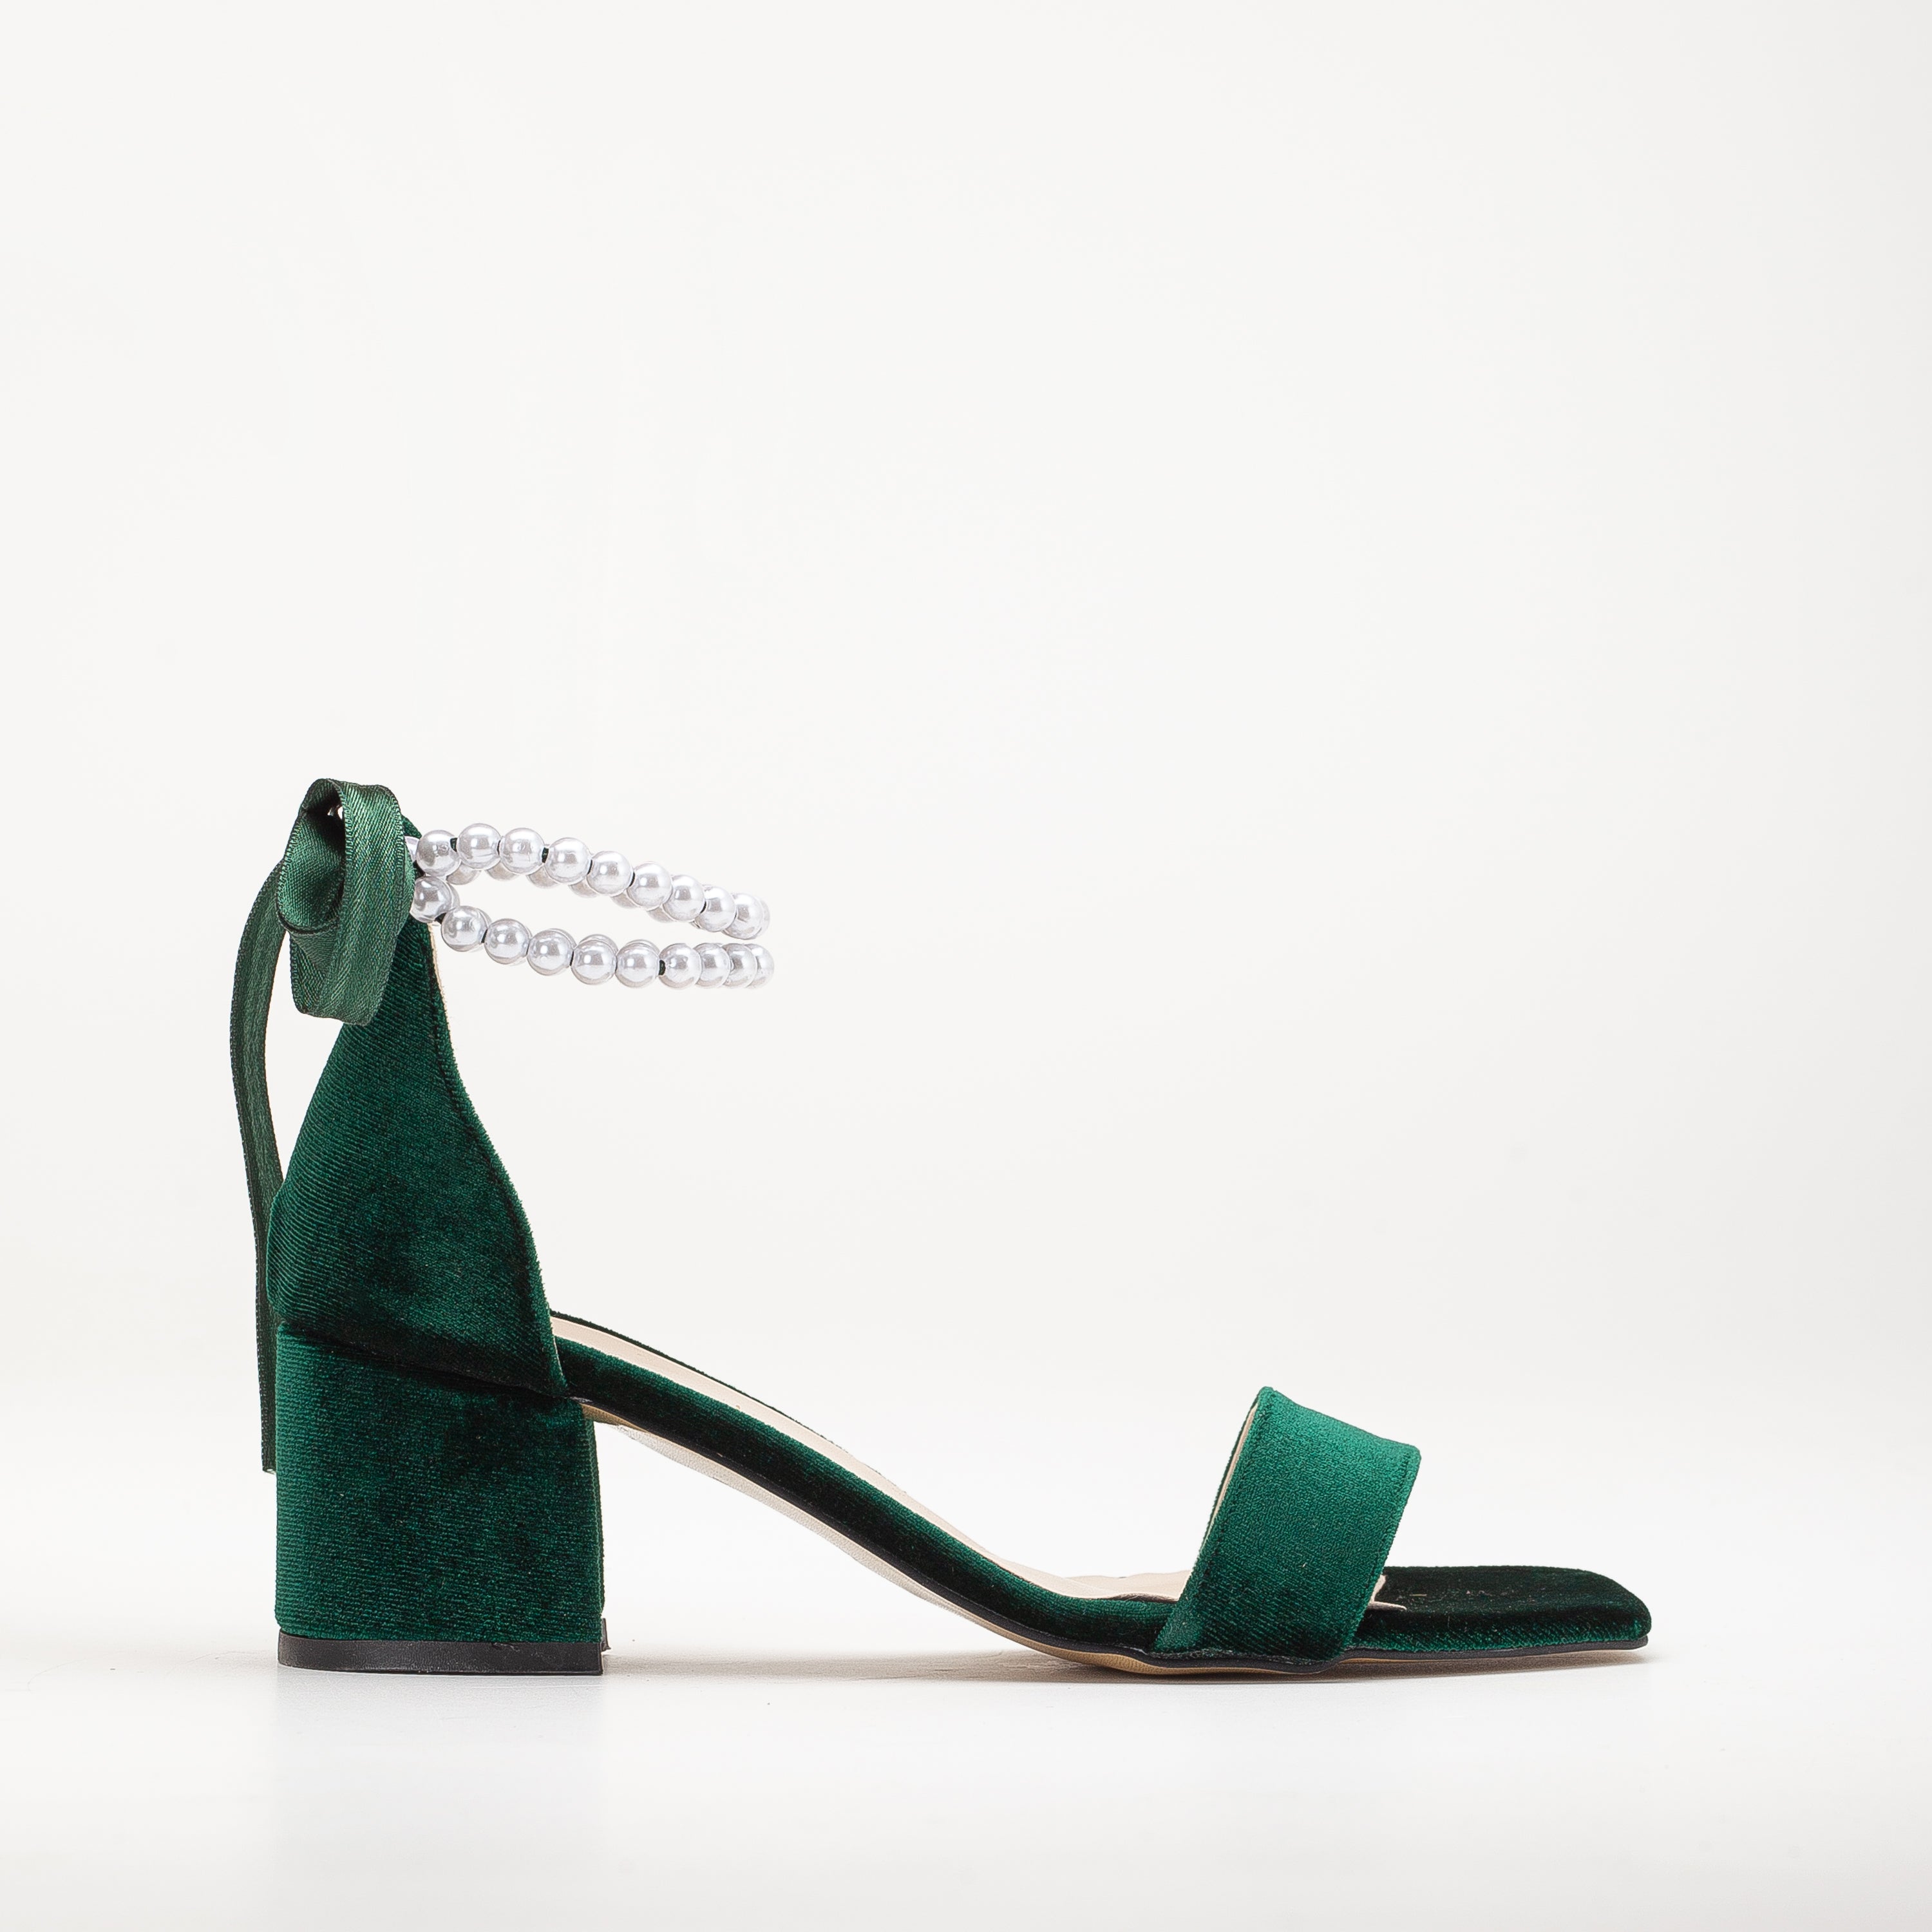 green velvet short heels, open toe shoes, pearl heel detail, women's shoes, elegant footwear, luxury heels, special occasion shoes, stylish sandals, fashion shoes, party shoes